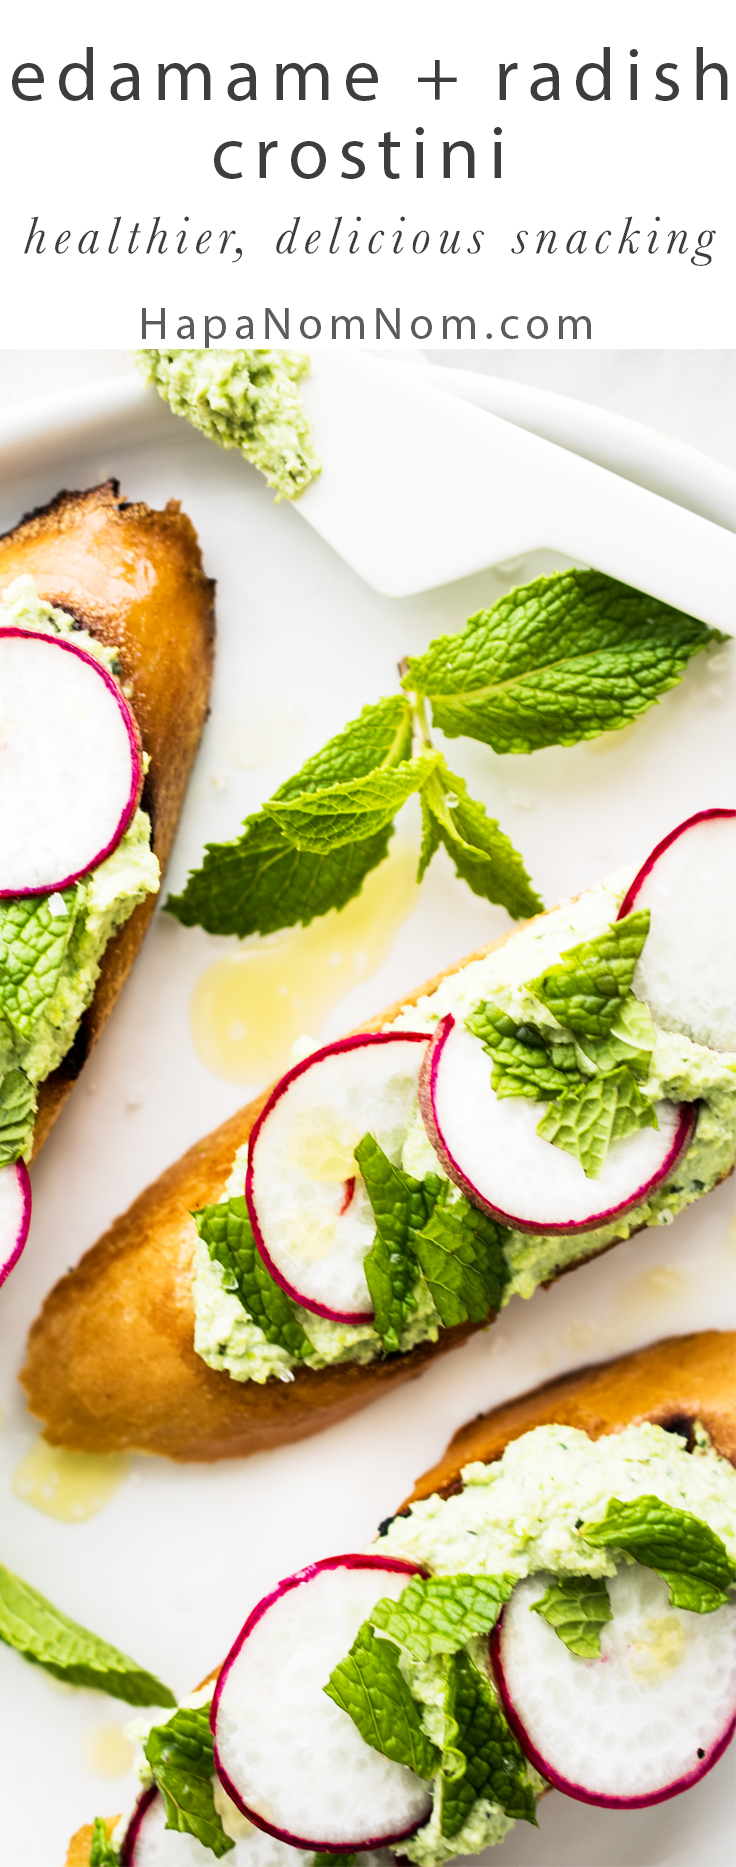 Edamame & Ricotta spread with thinly sliced radishes, mint, and sea salt on toasted bread. Ready for snacking in about 10 minutes! 